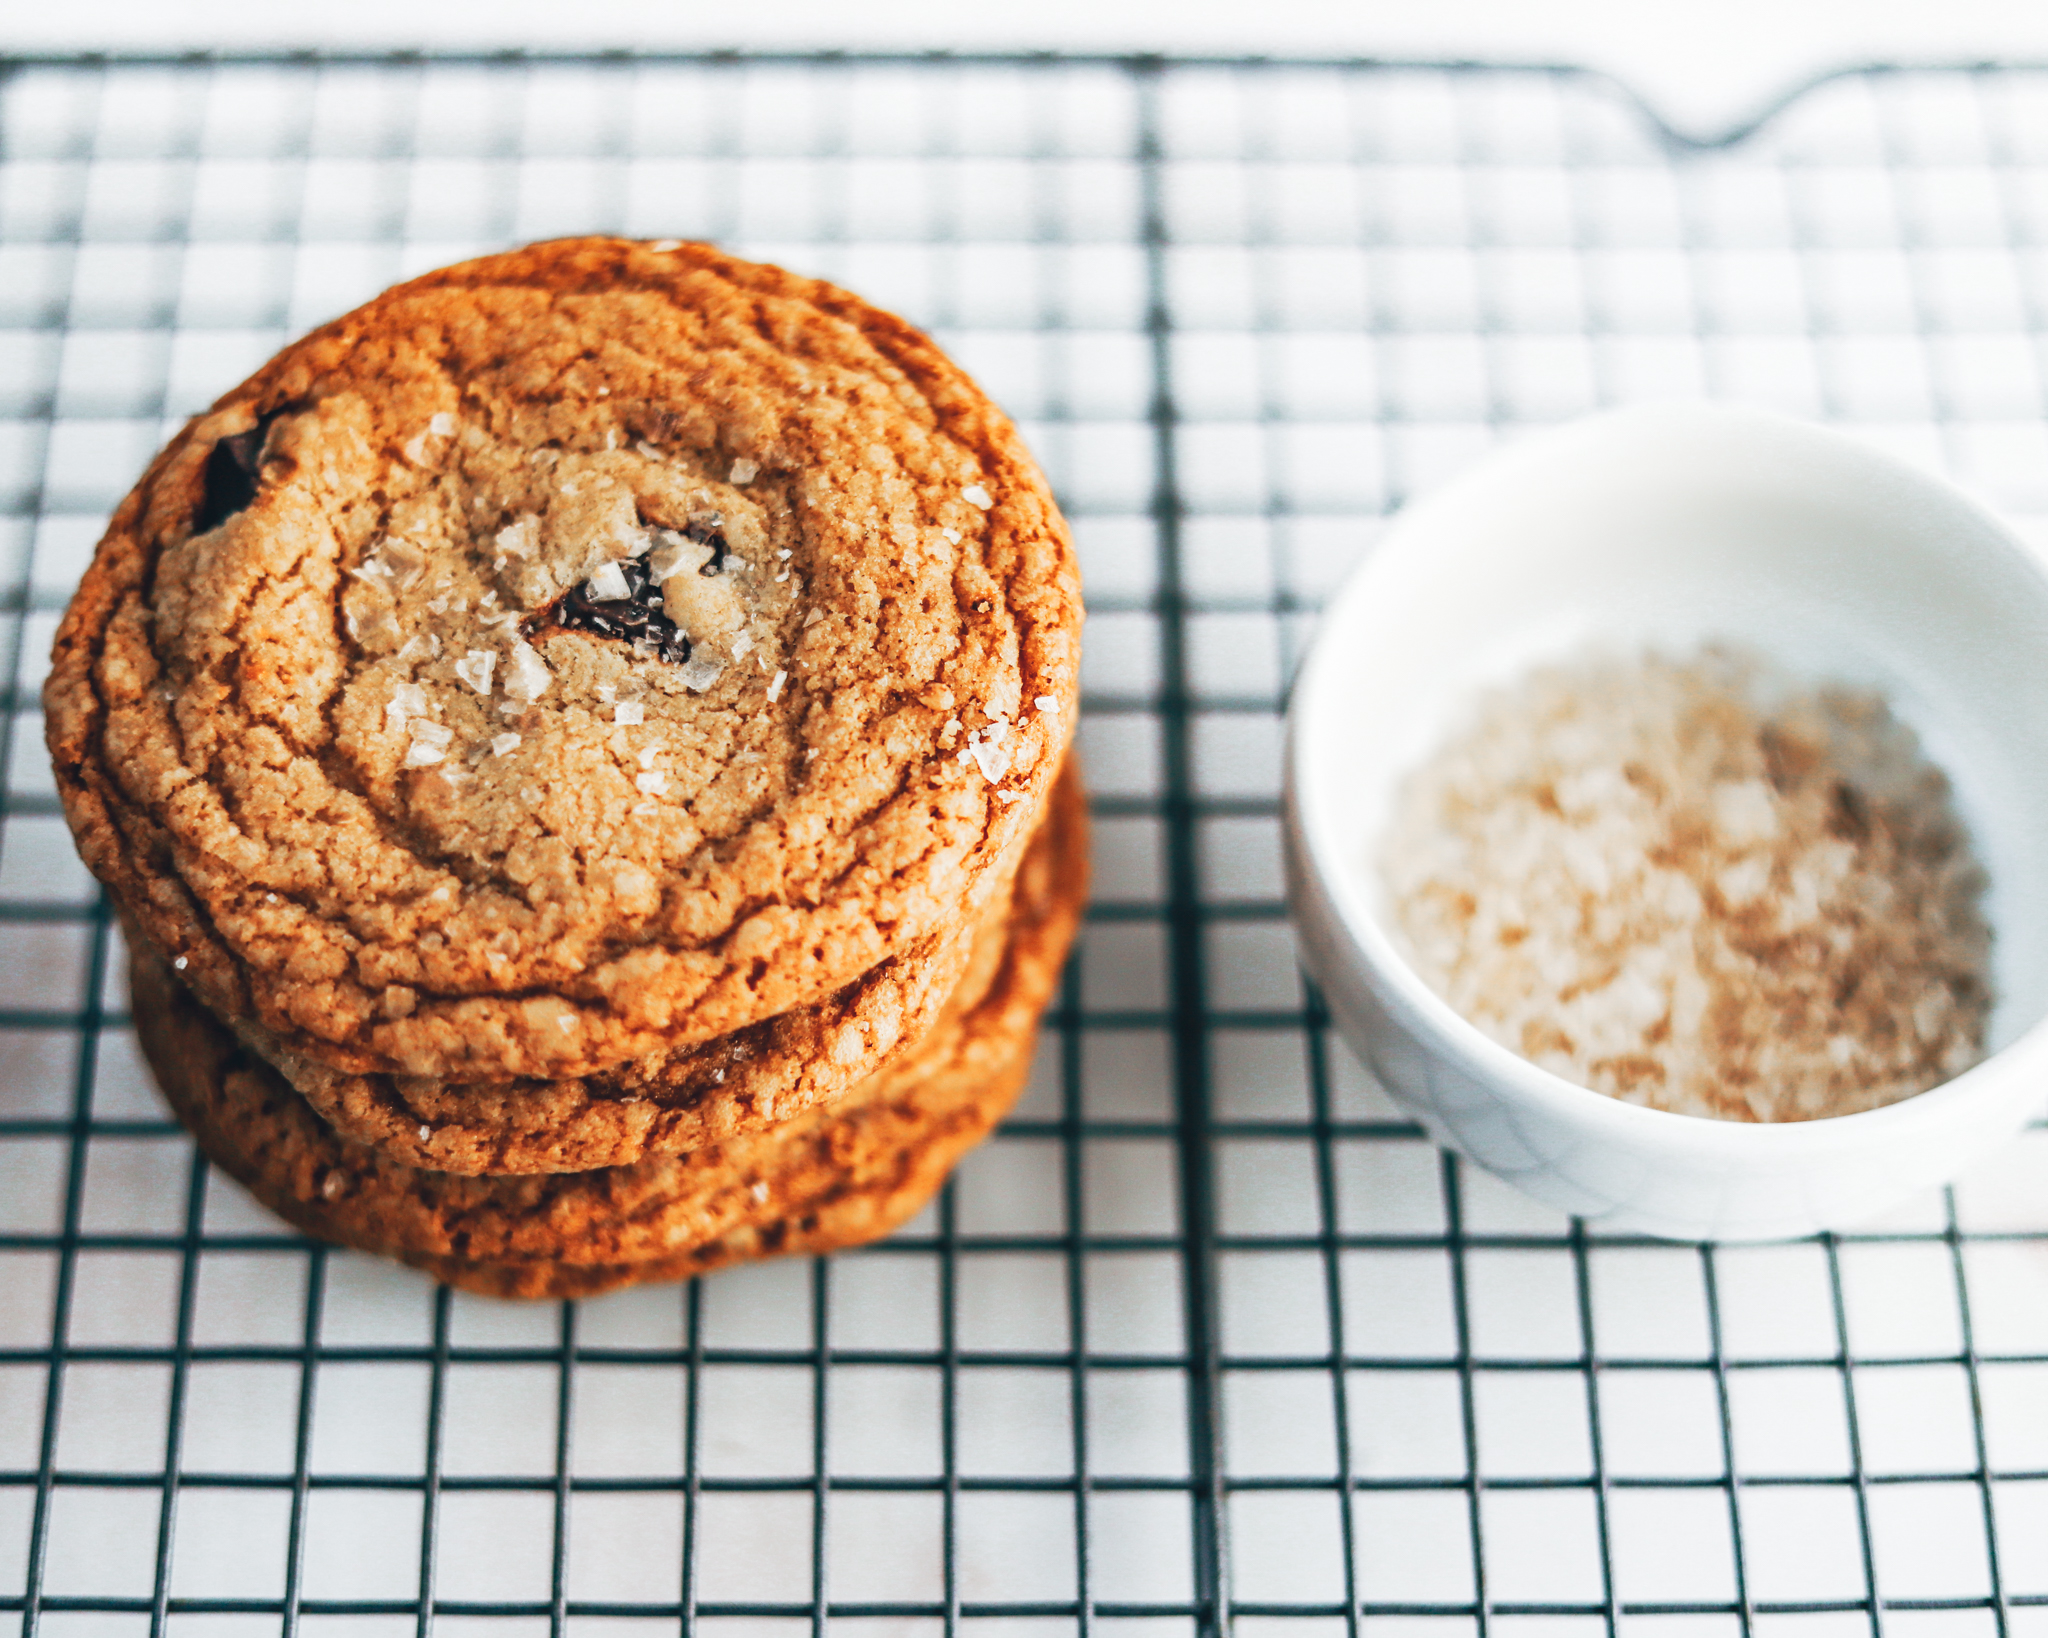 Stacked chocolate chip cookies sit on a cooling rack next to a bowl of flakey sea salt for garnishing